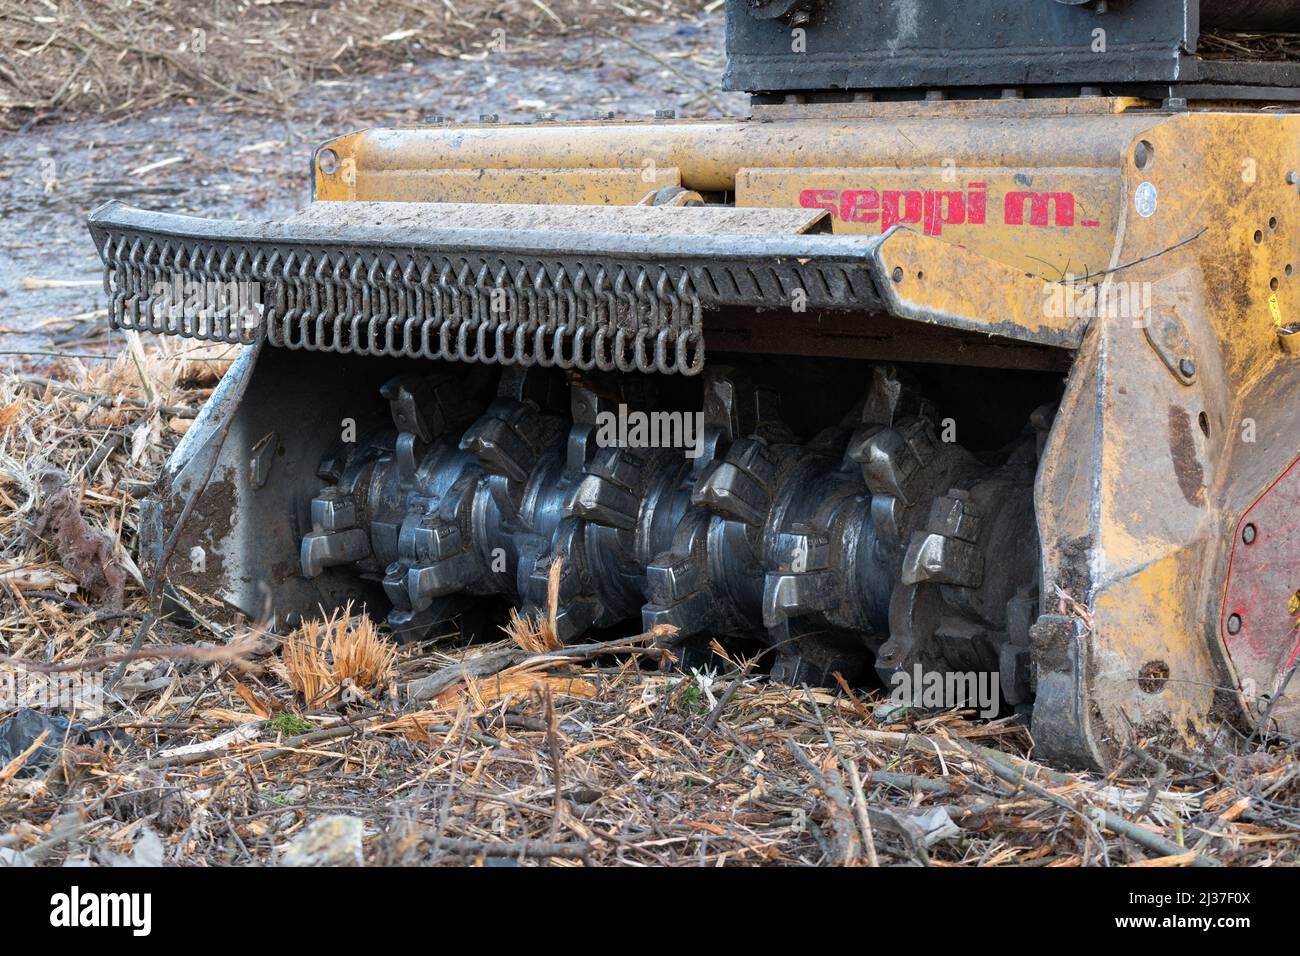 Forestry mulcher attachment for backhoe close up, land clearing heavy equipment Stock Photo